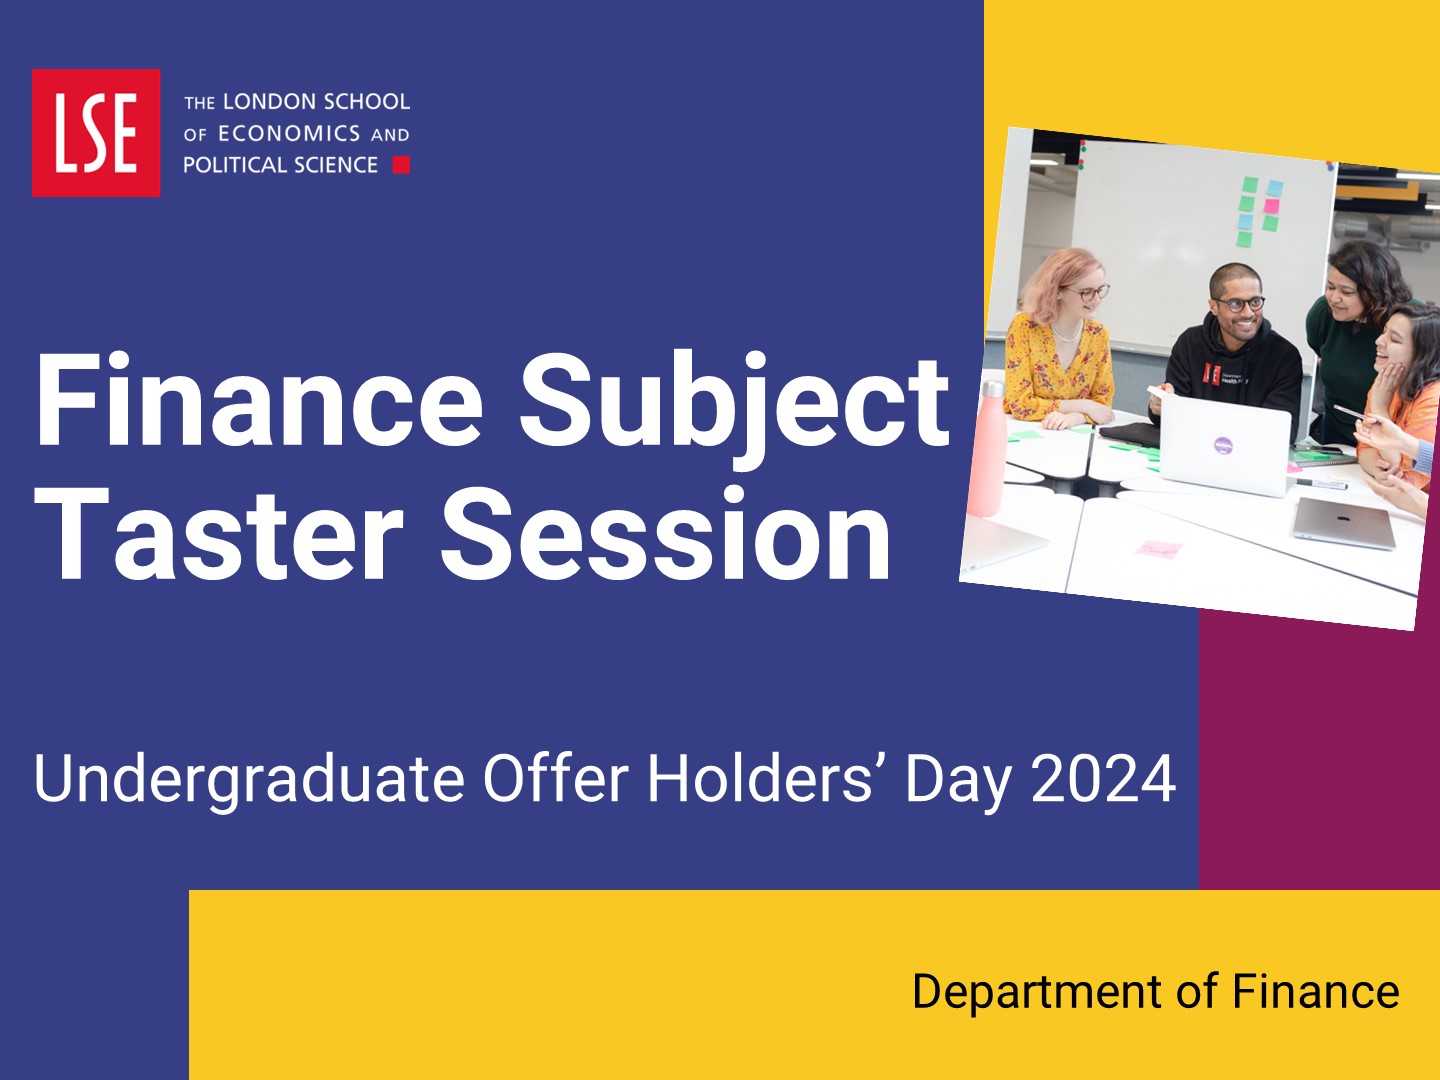 Watch the finance subject taster session